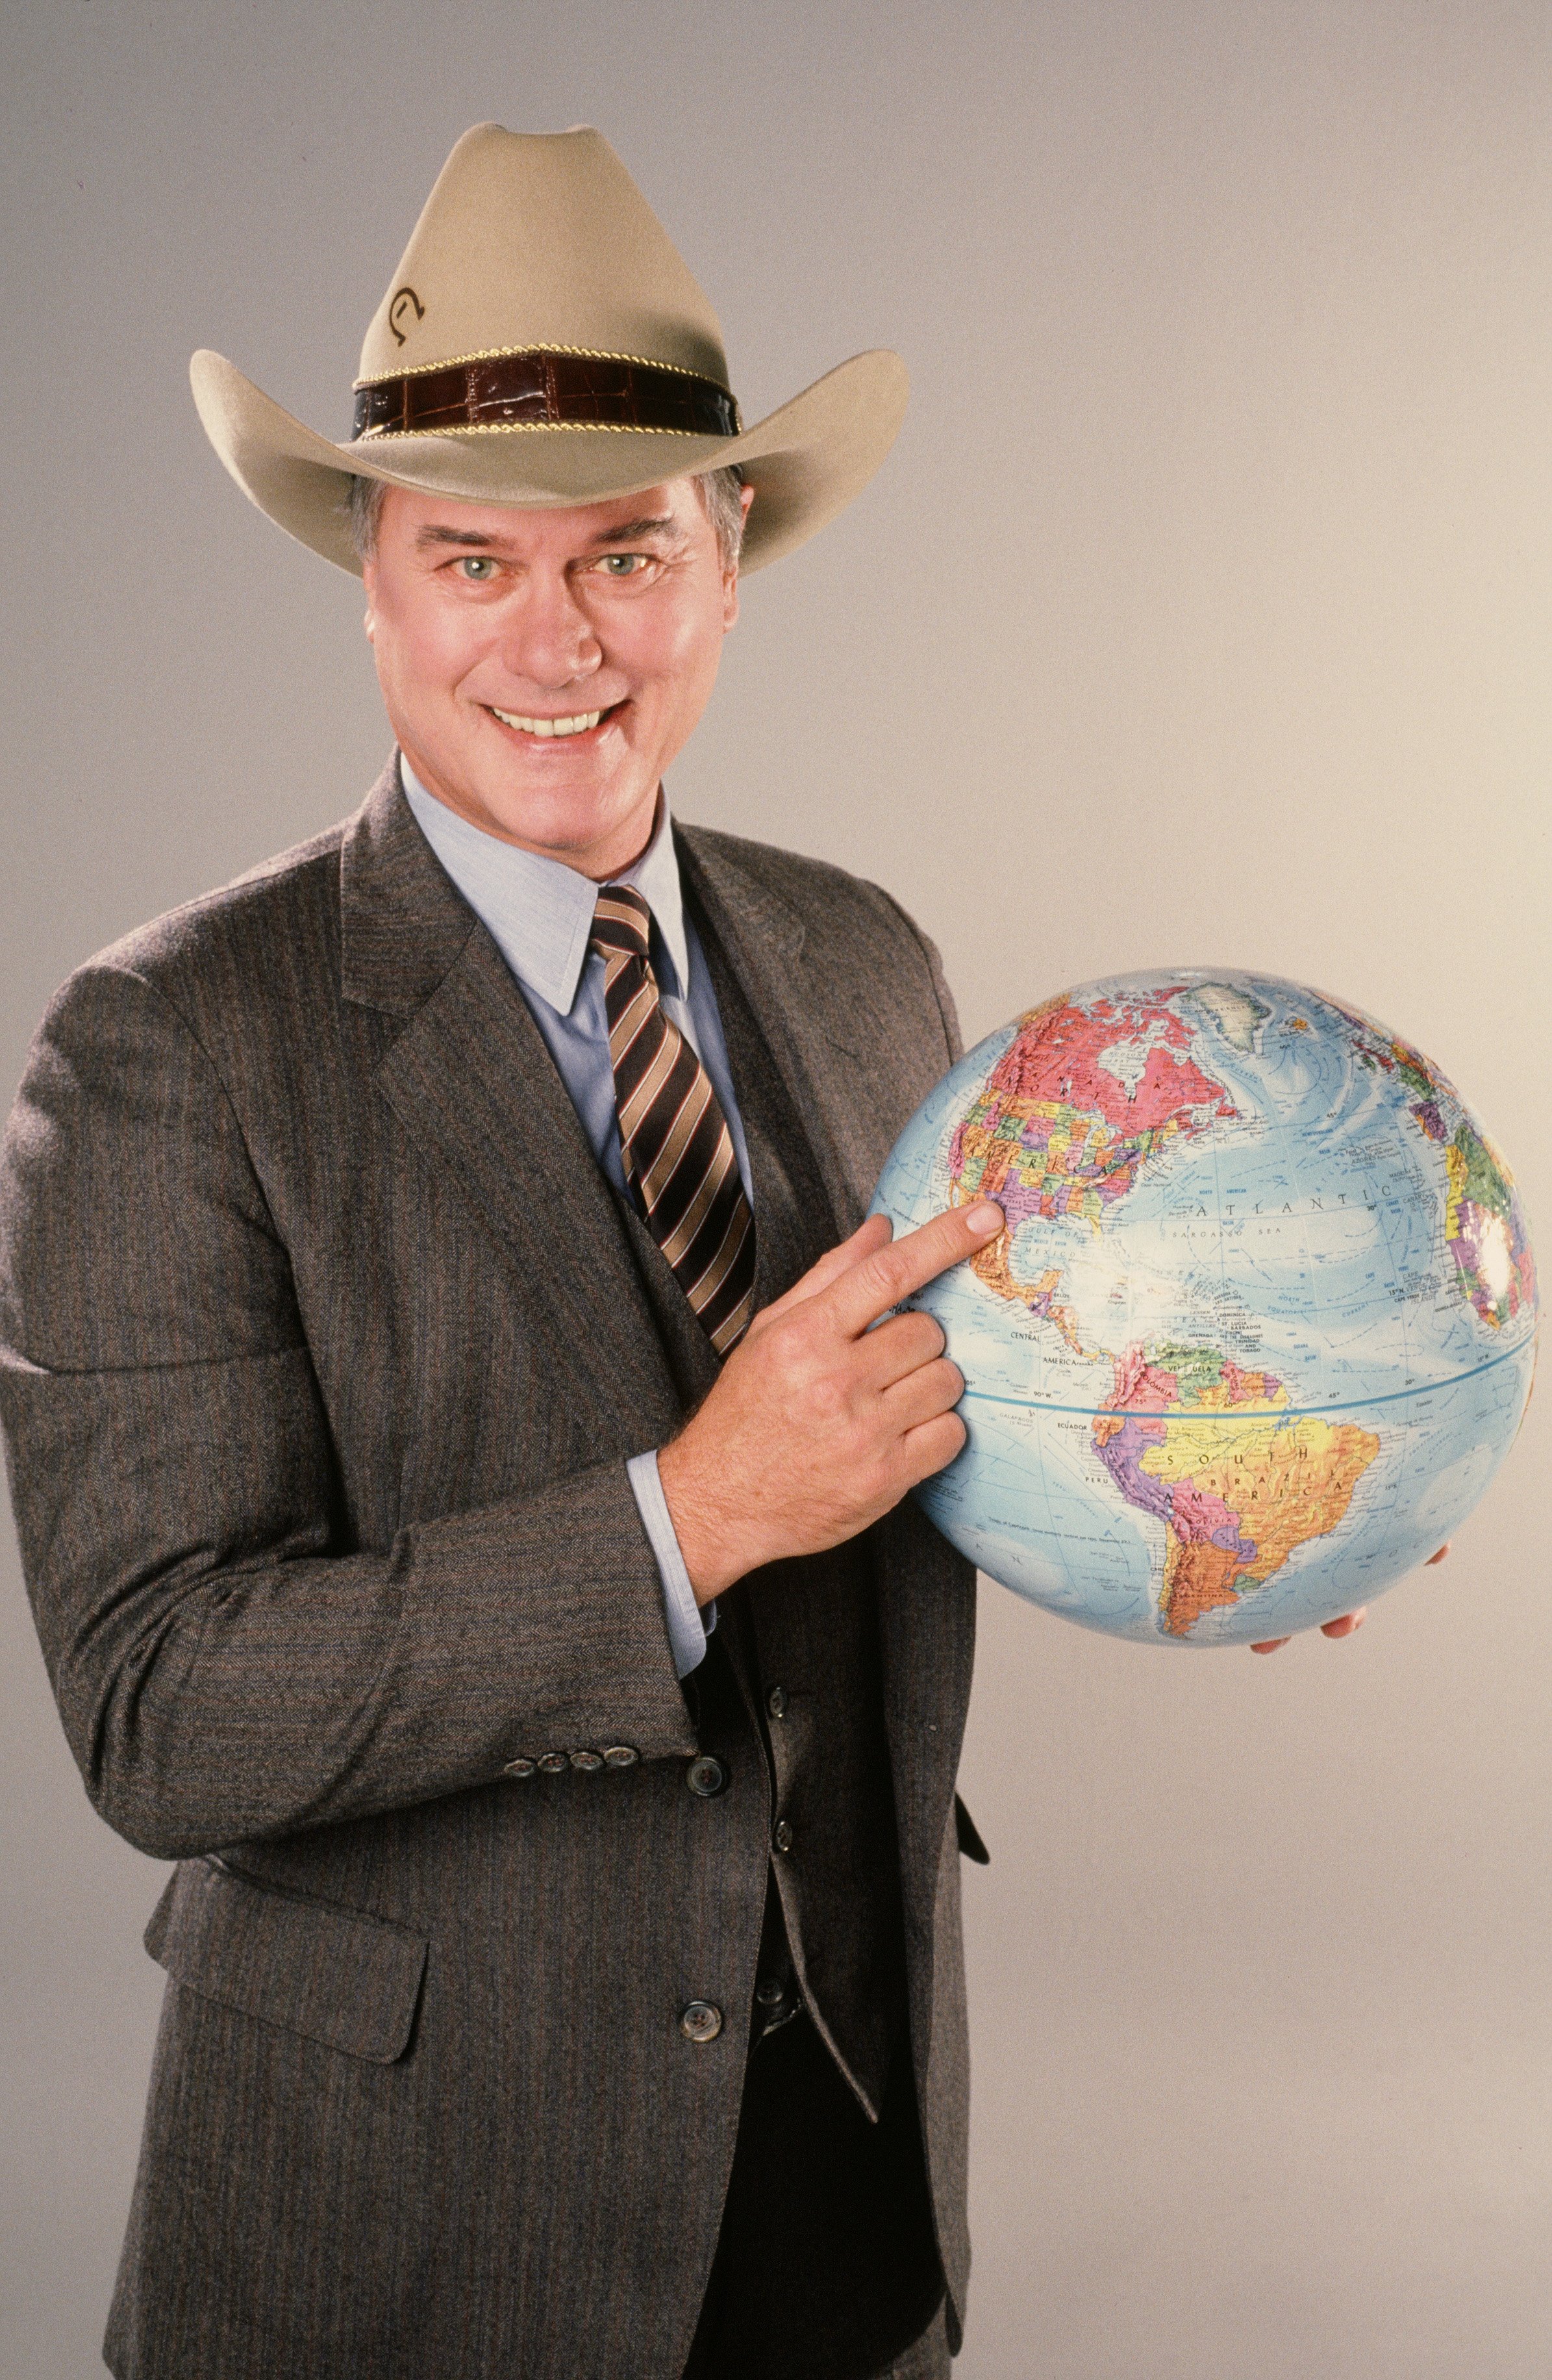 Larry Hagman smiles during a studio portrait session in Los Angeles, California in 1982. | Photo: Getty Images